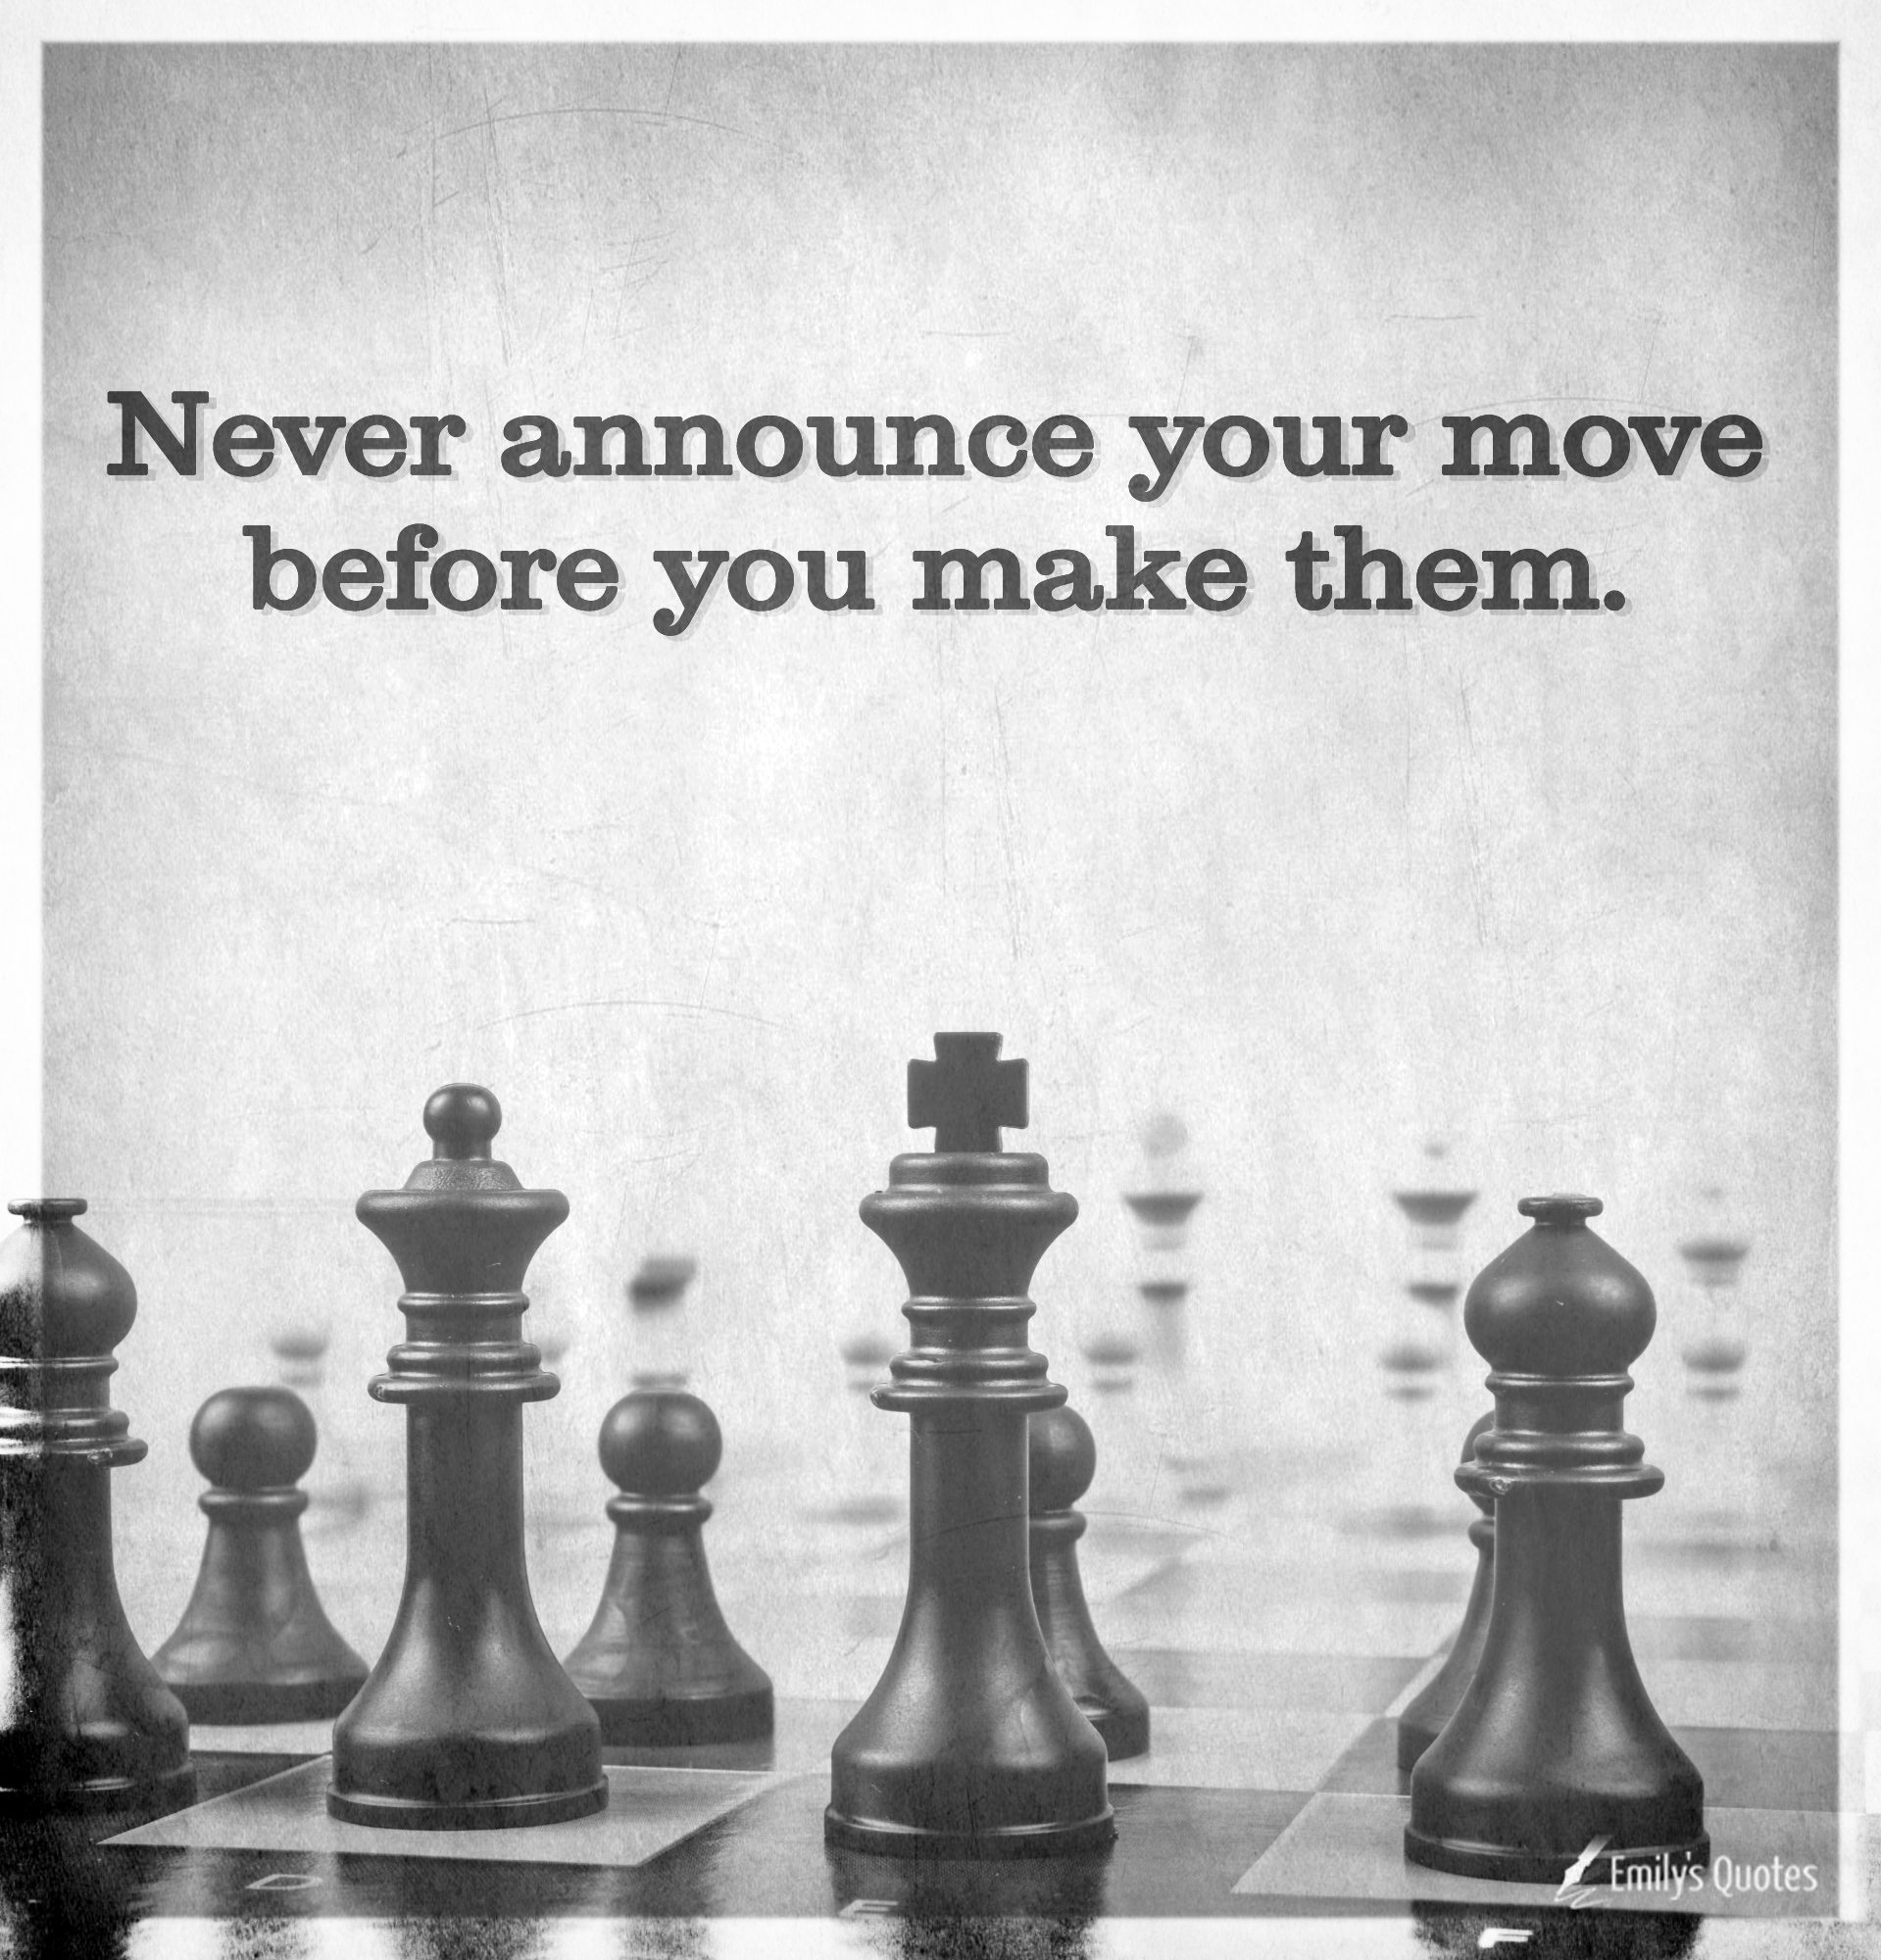 Never announce your move before you make them